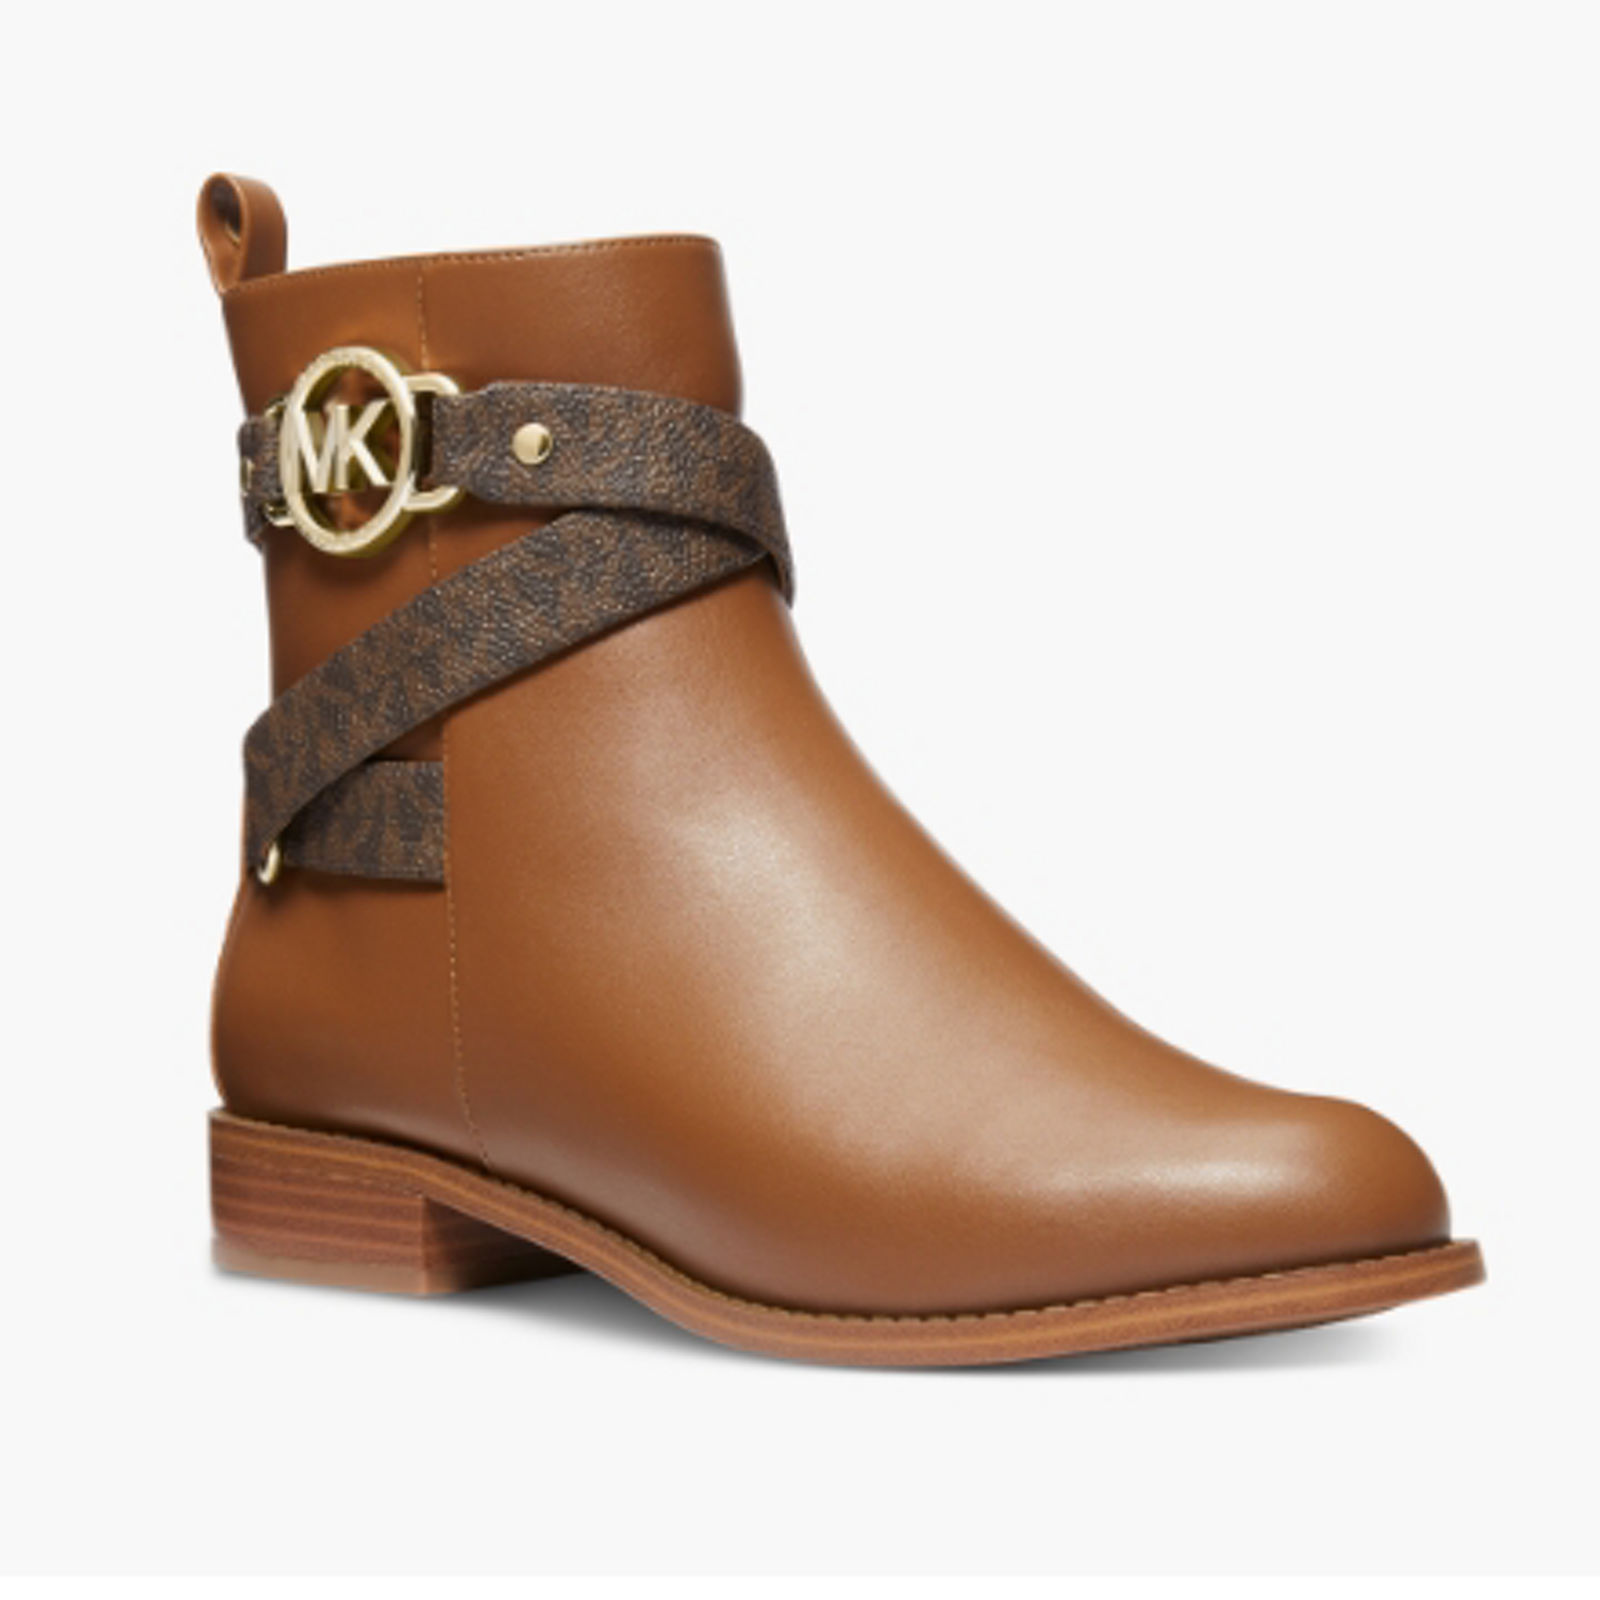 Macy's Deals on Michael Kors Boots and Sneakers — Up to 52% Off